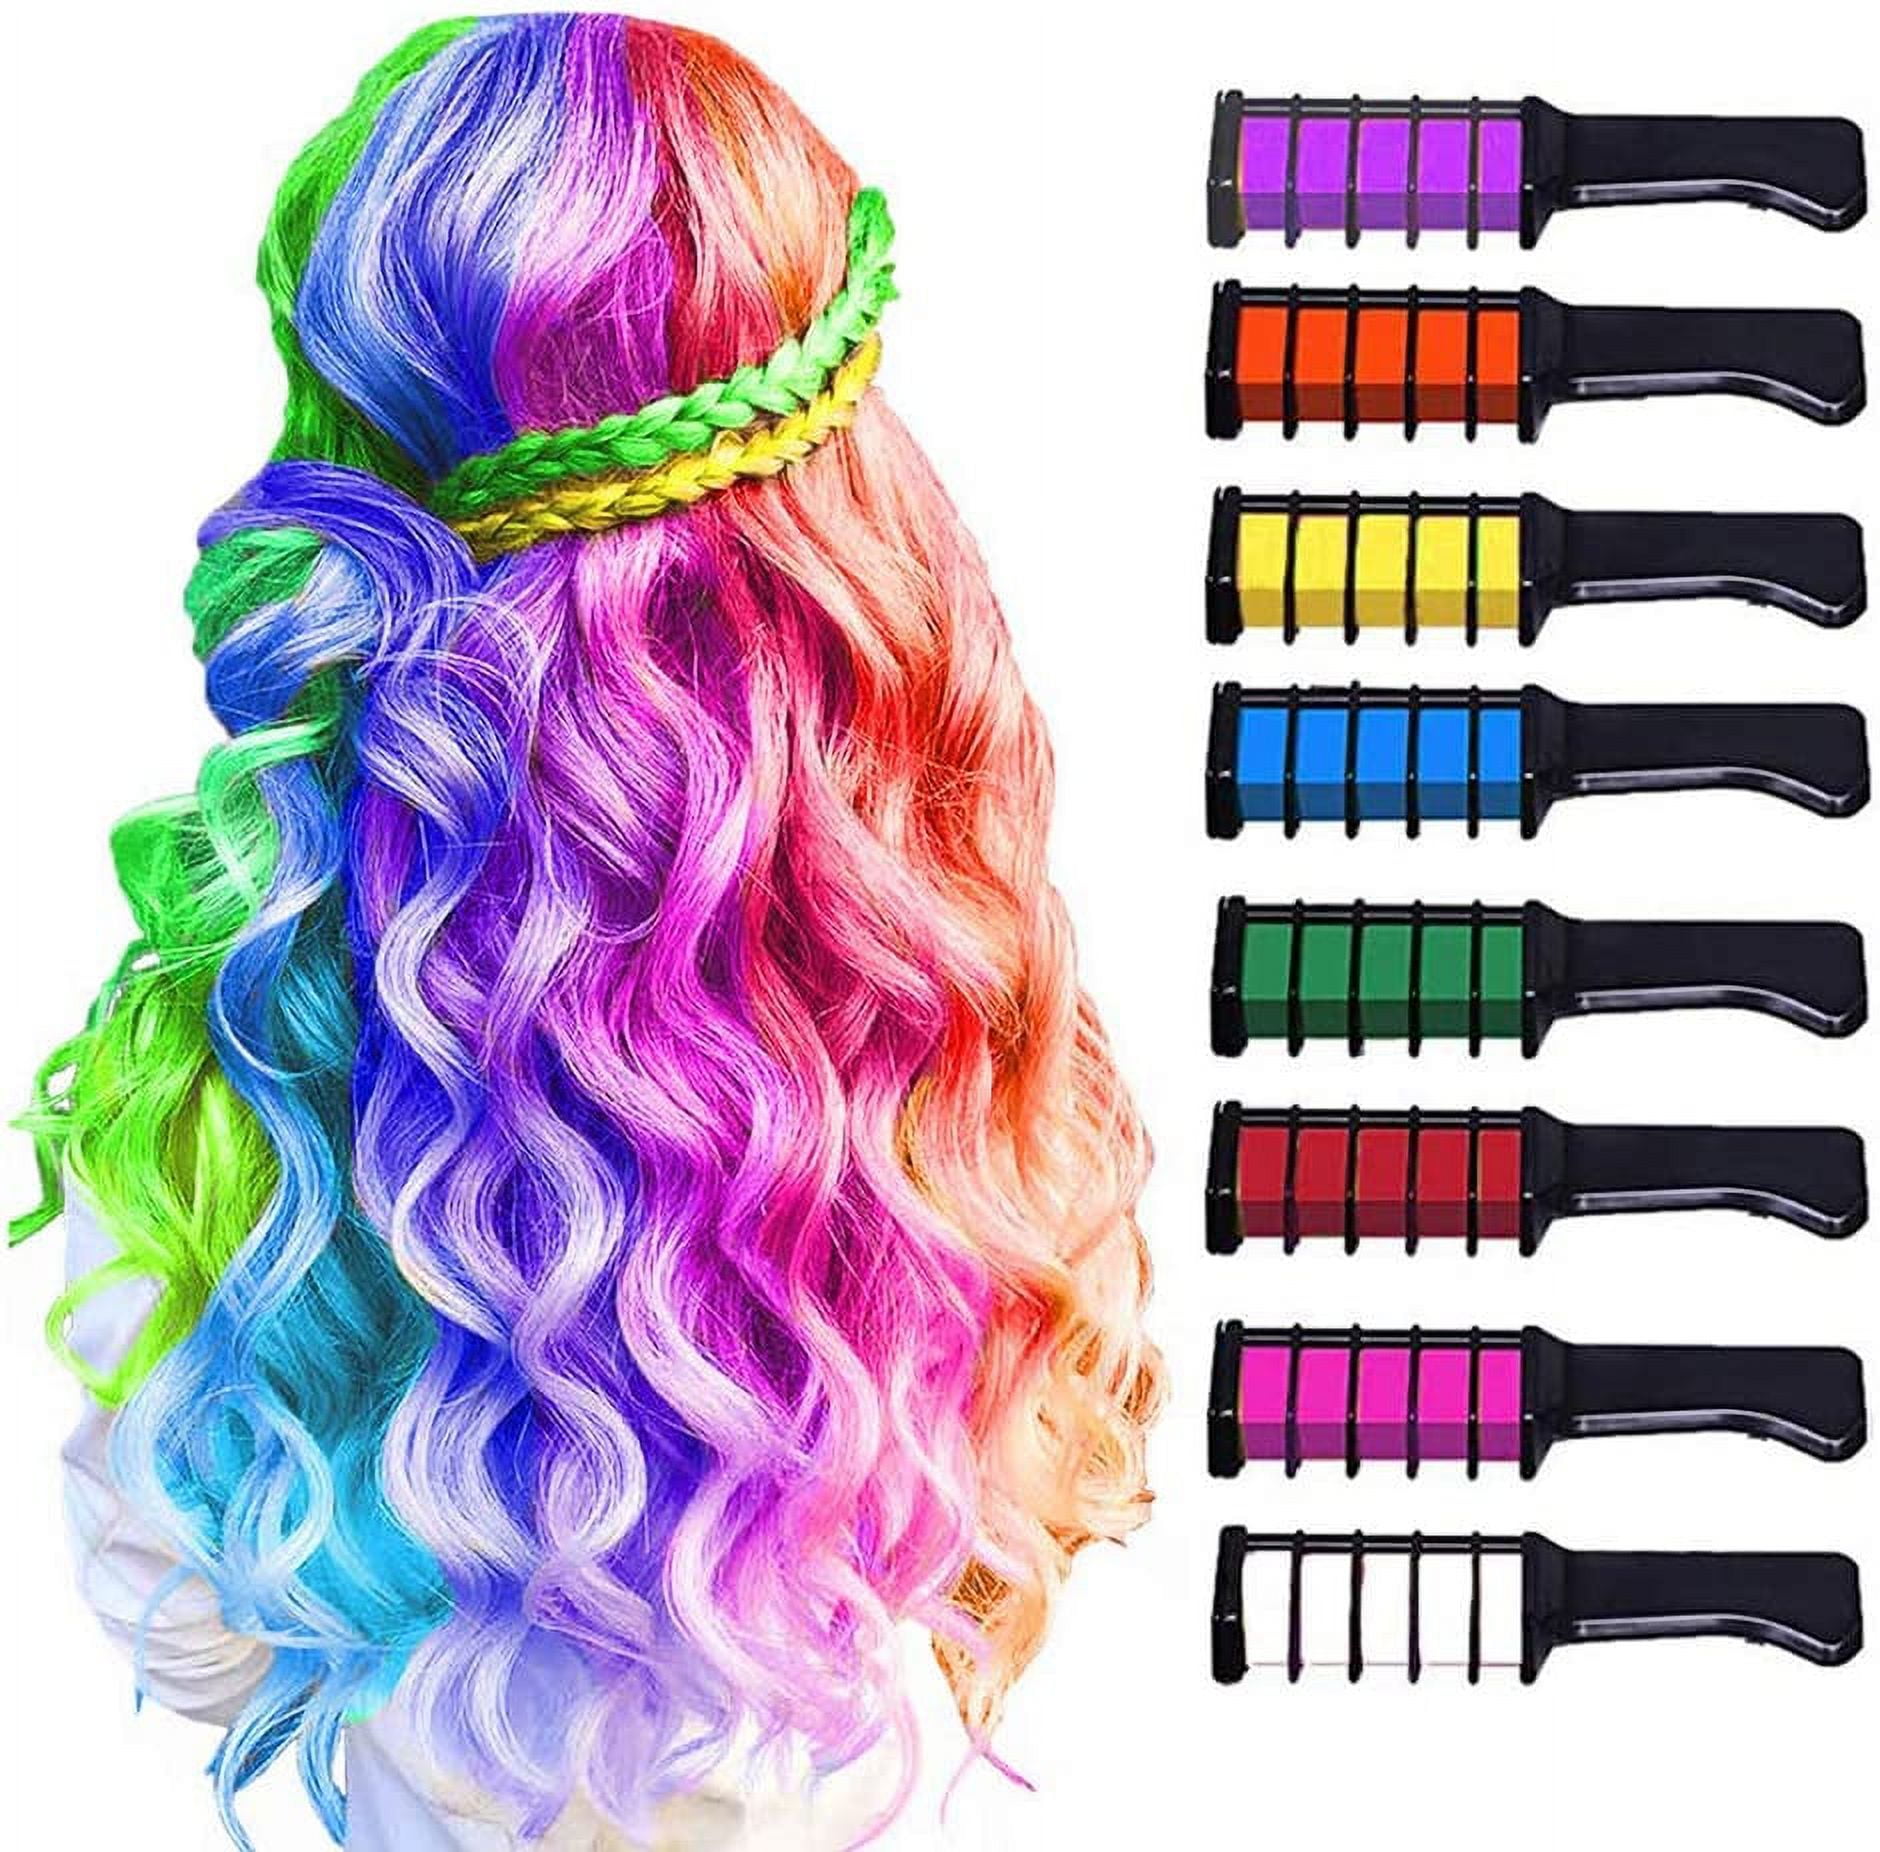 Hair Chalks for Girls, 6 Bright Temporary Washable Hair Color Combs with 3  Glitter, Hair Chalk Dyeing for Birthday Cosplay Halloween Party, Non-Toxic,  Safe for Kids & Teens - Yahoo Shopping